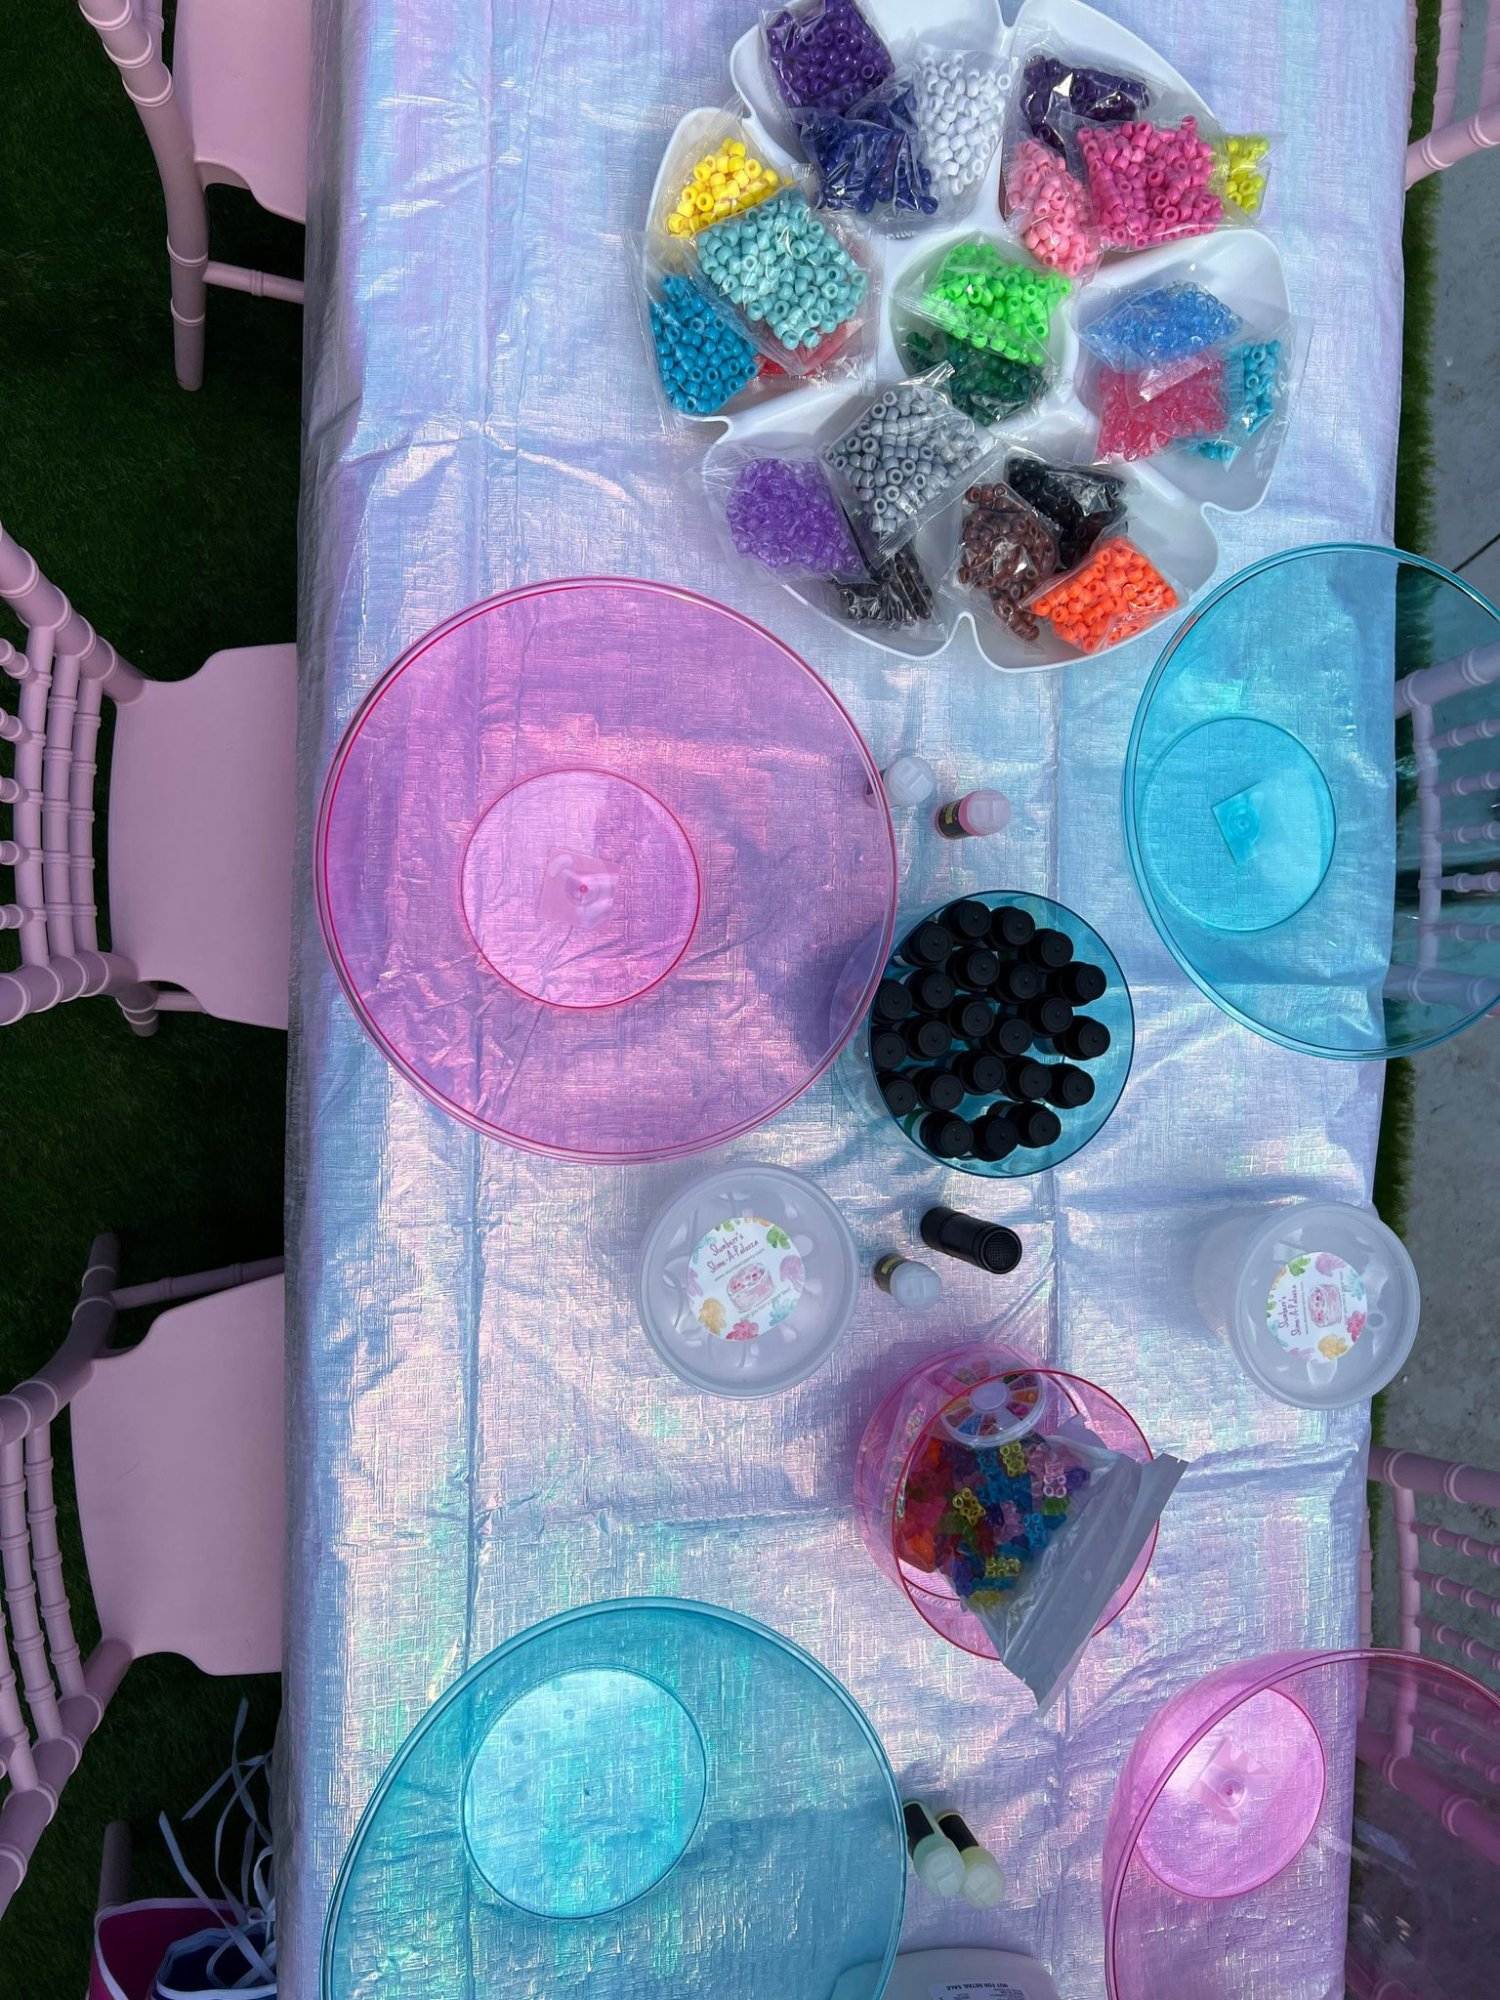 Overhead view of a crafting table designed to entertain kids during a wedding, with colorful beads in assorted containers and empty plastic bowls on a pink tablecloth.